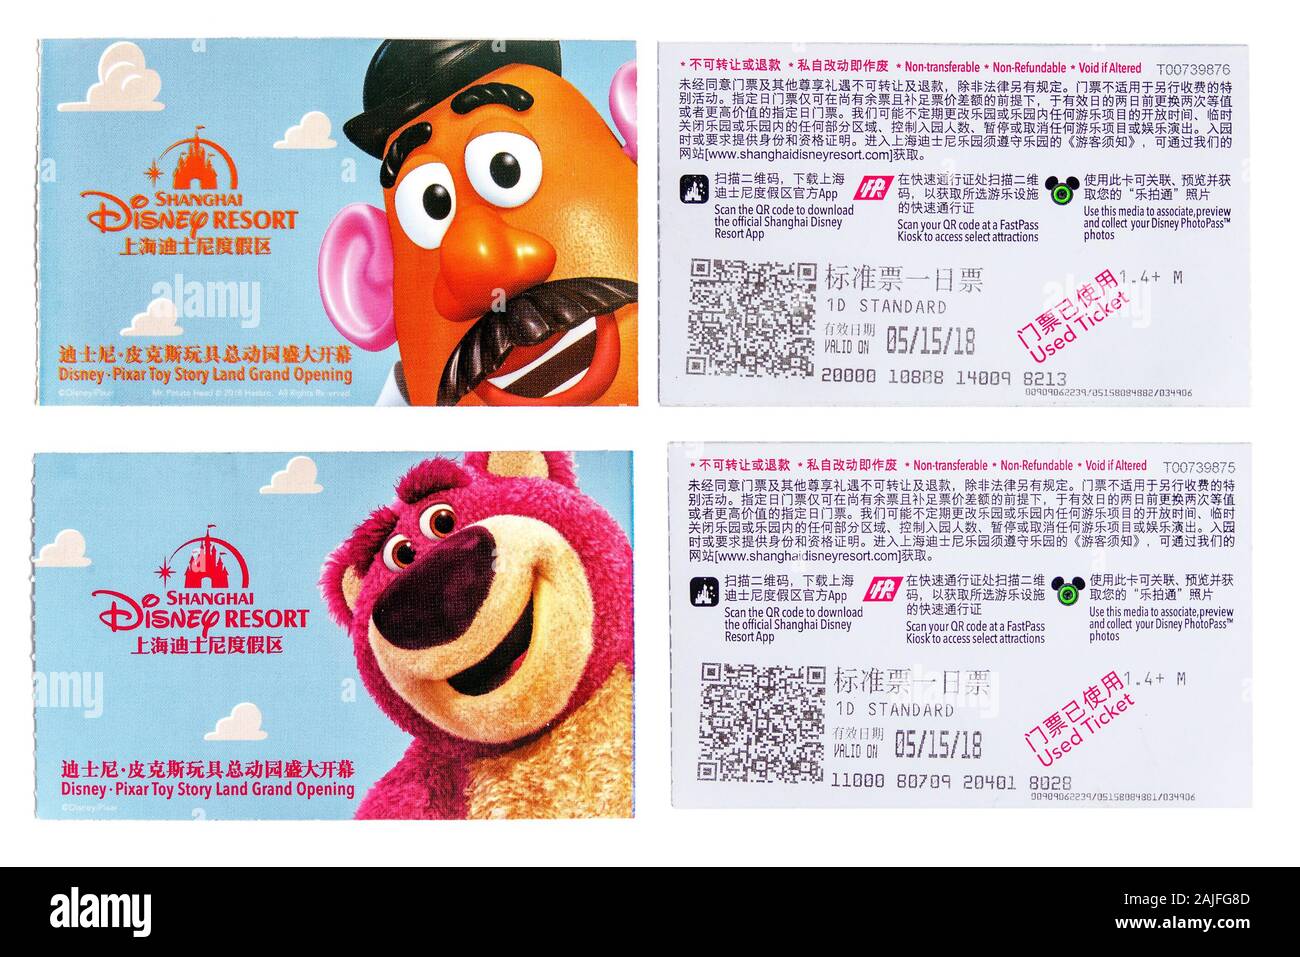 SHANGHAI, CHINA - MAY 15, 2018: Tickets of Shanghai Disneyland is a famous tourist and popular family holiday destination in China. Isolated on a whit Stock Photo